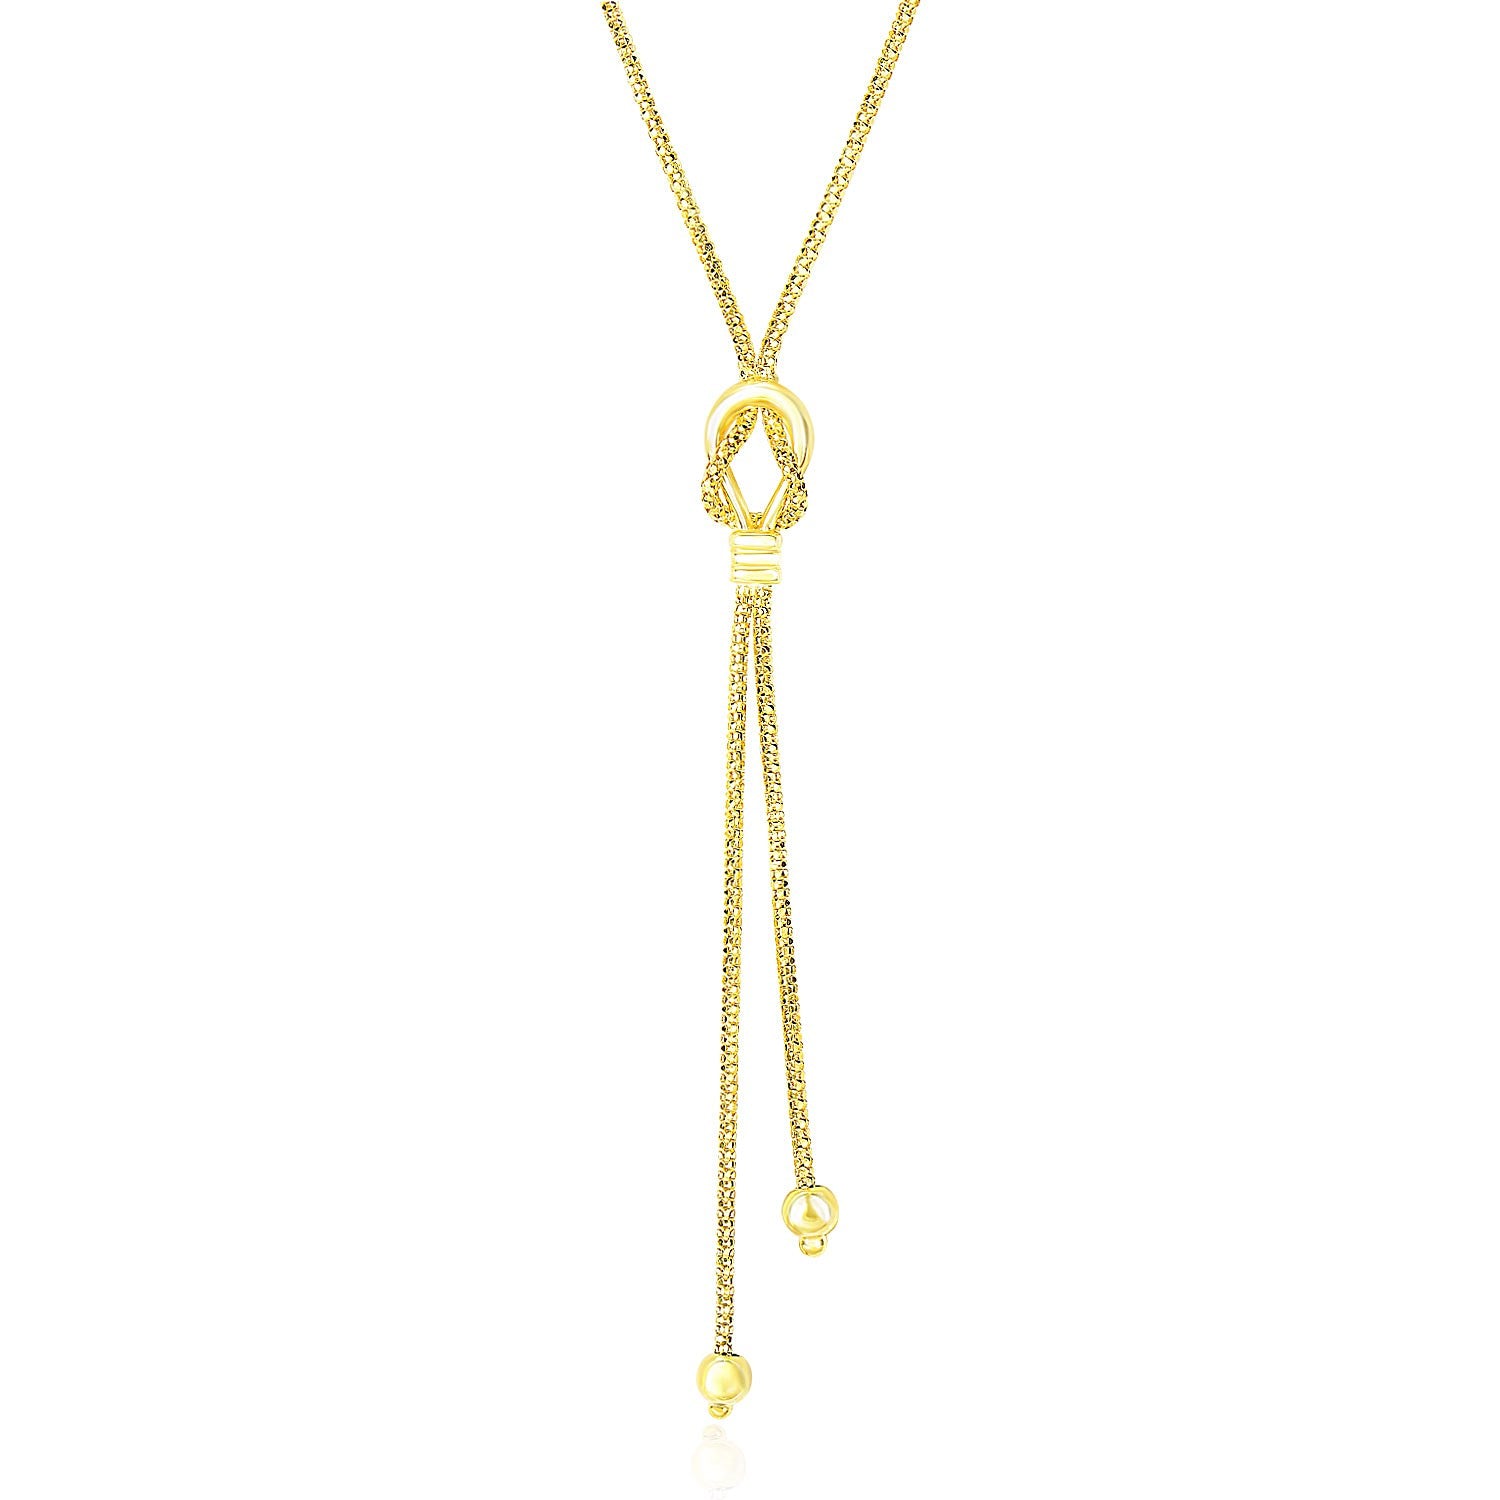 14k Yellow Gold Lariat Popcorn Necklace with Noose Design